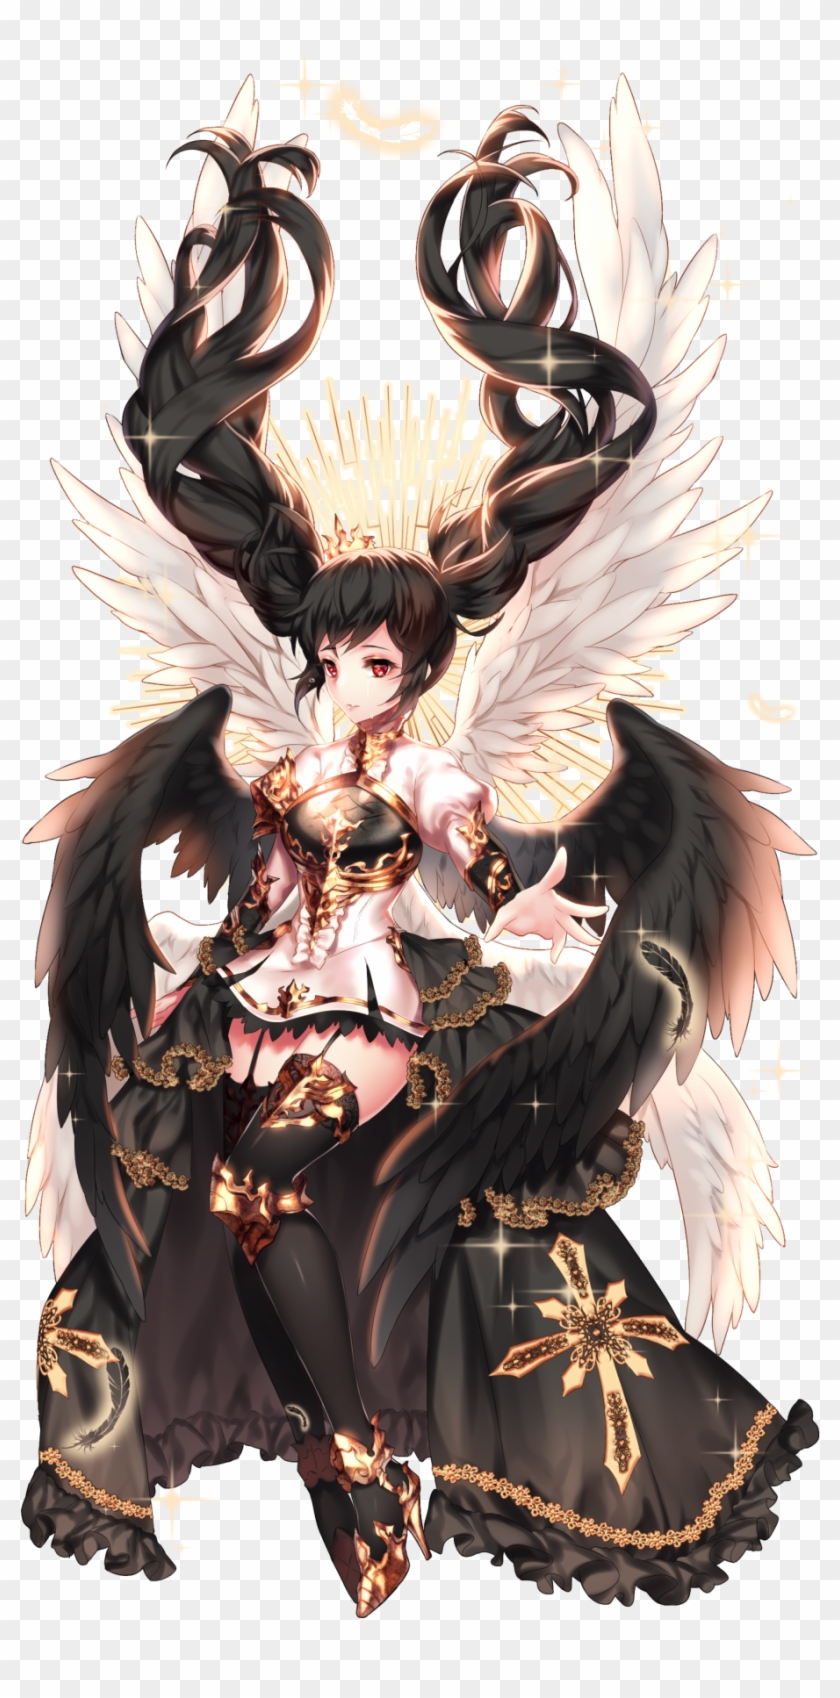 Sexy & Beautiful Art - Angel Girl Anime With Black Wings Clipart #2634322